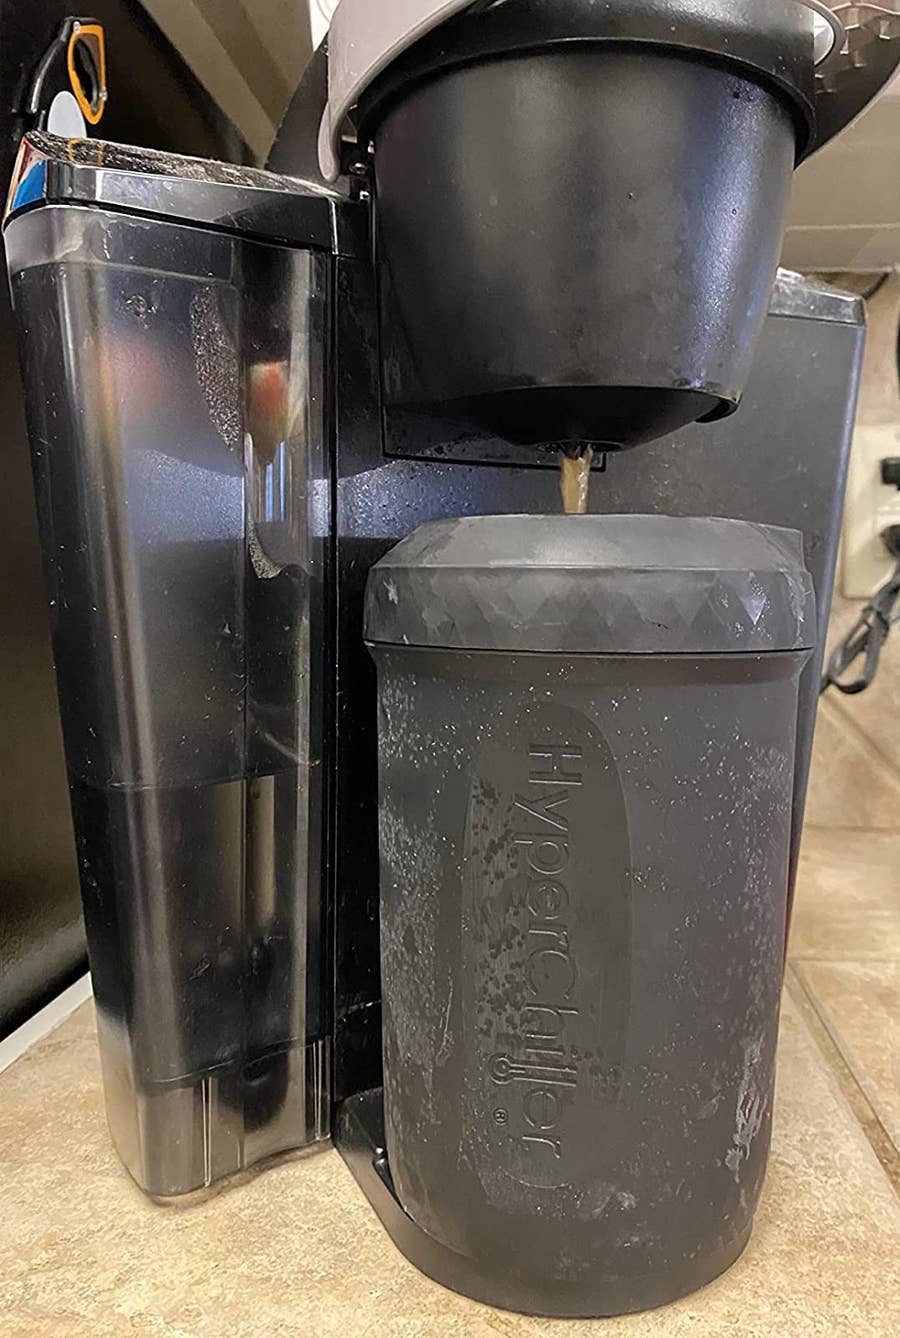 Hyperchiller Coffeemaker Review, Plus How to Use It [Updated]